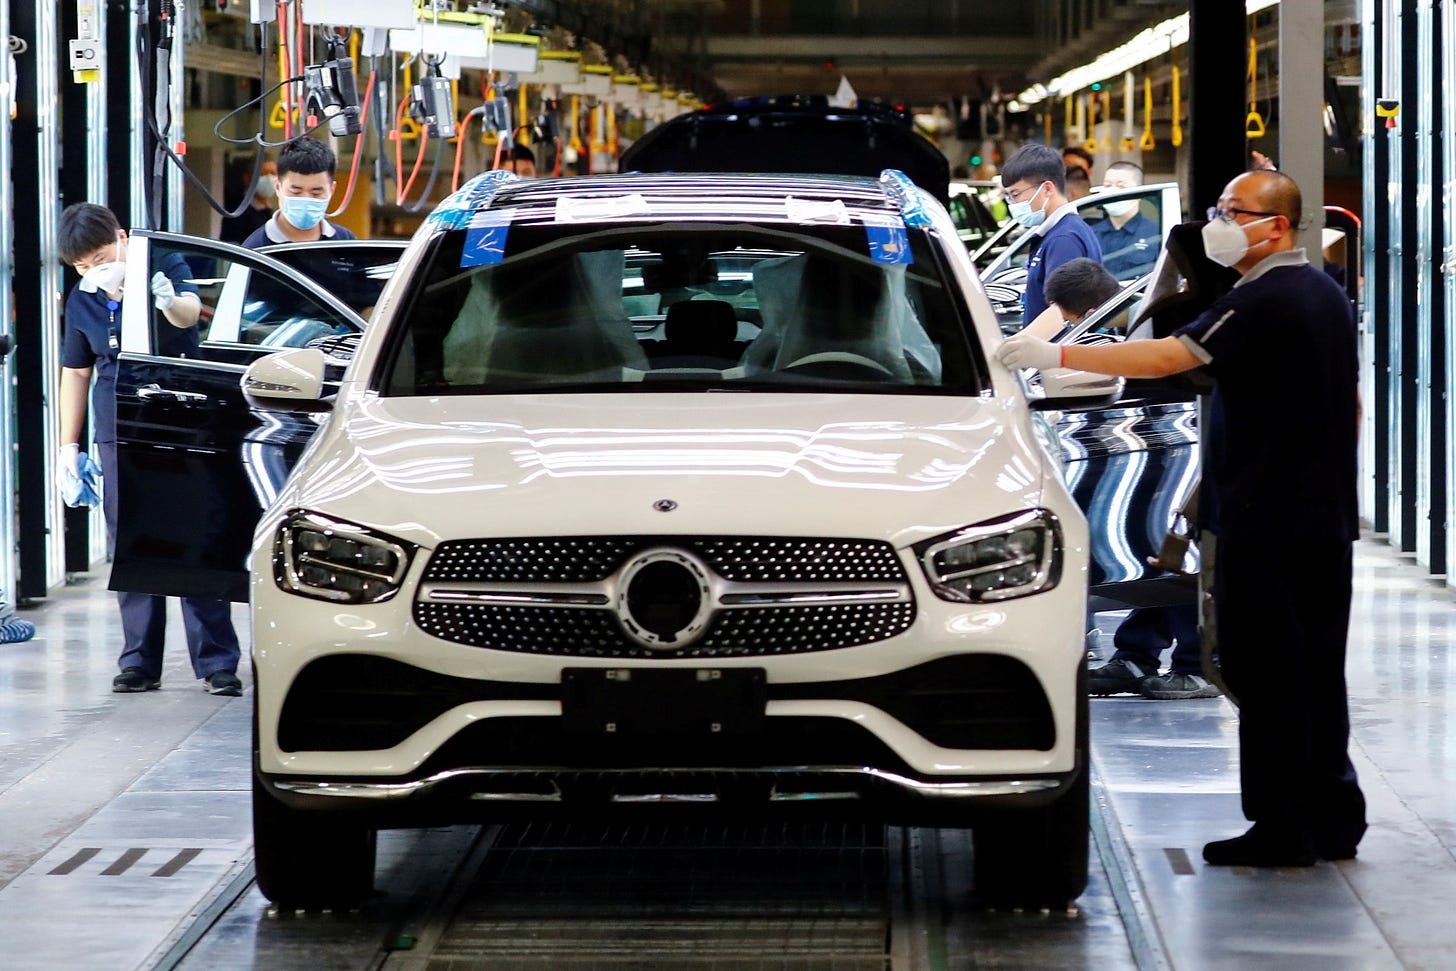 Daimler's China venture aims to raise capacity 45% at Mercedes-Benz plants  -document | Reuters